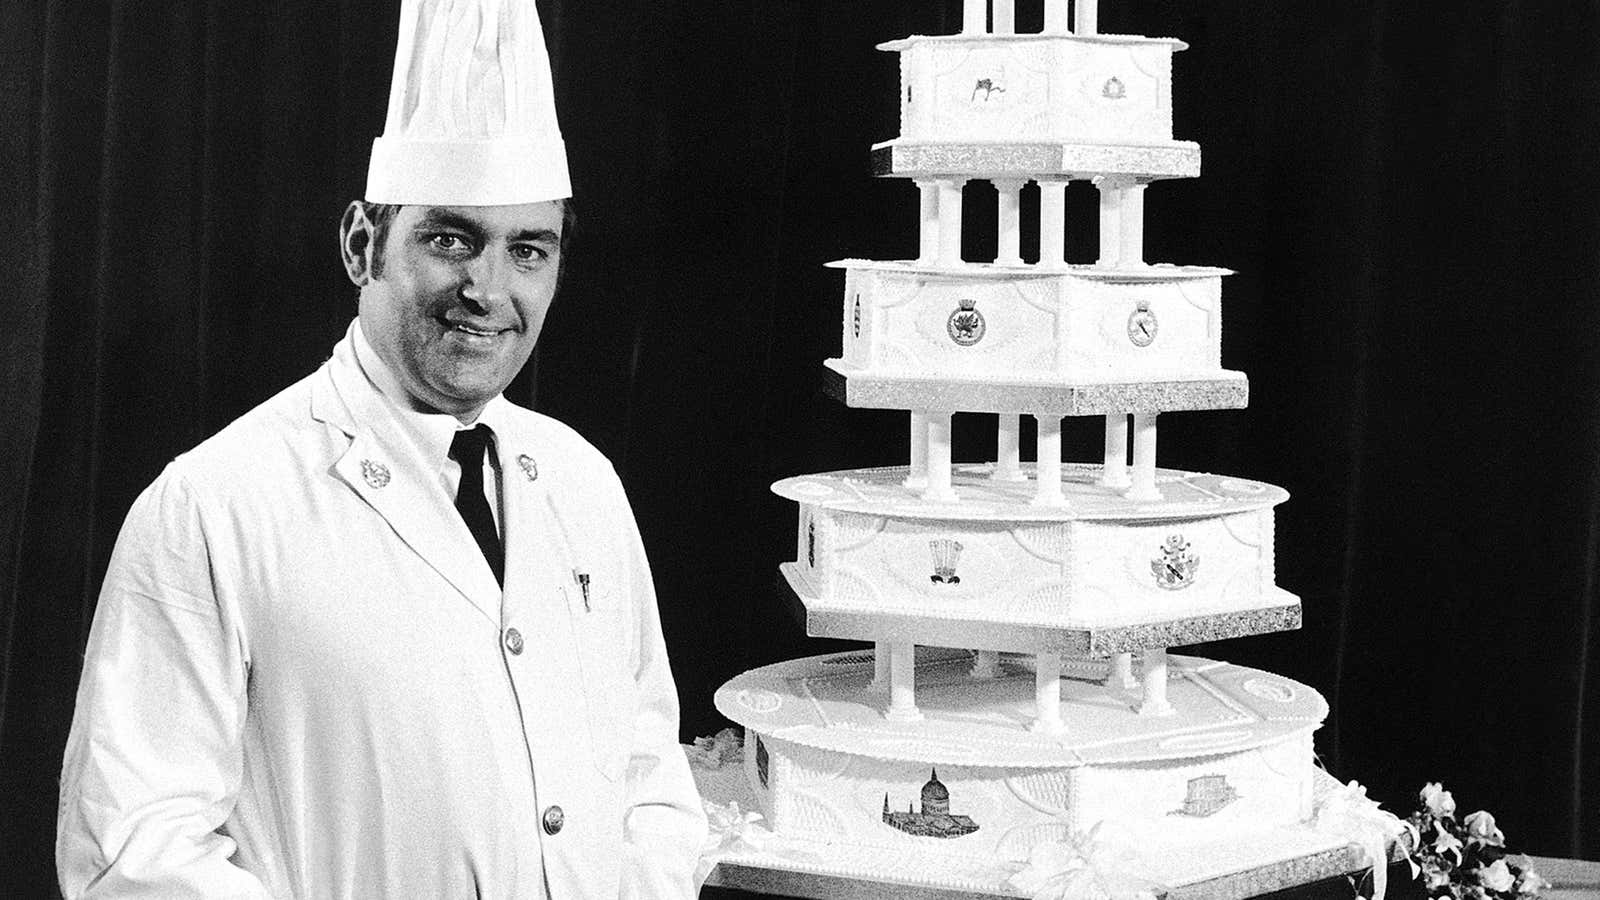 The wedding cake—five feet high and weighing 255 pounds—for the marriage of Prince Charles and Lady Diana Spencer.